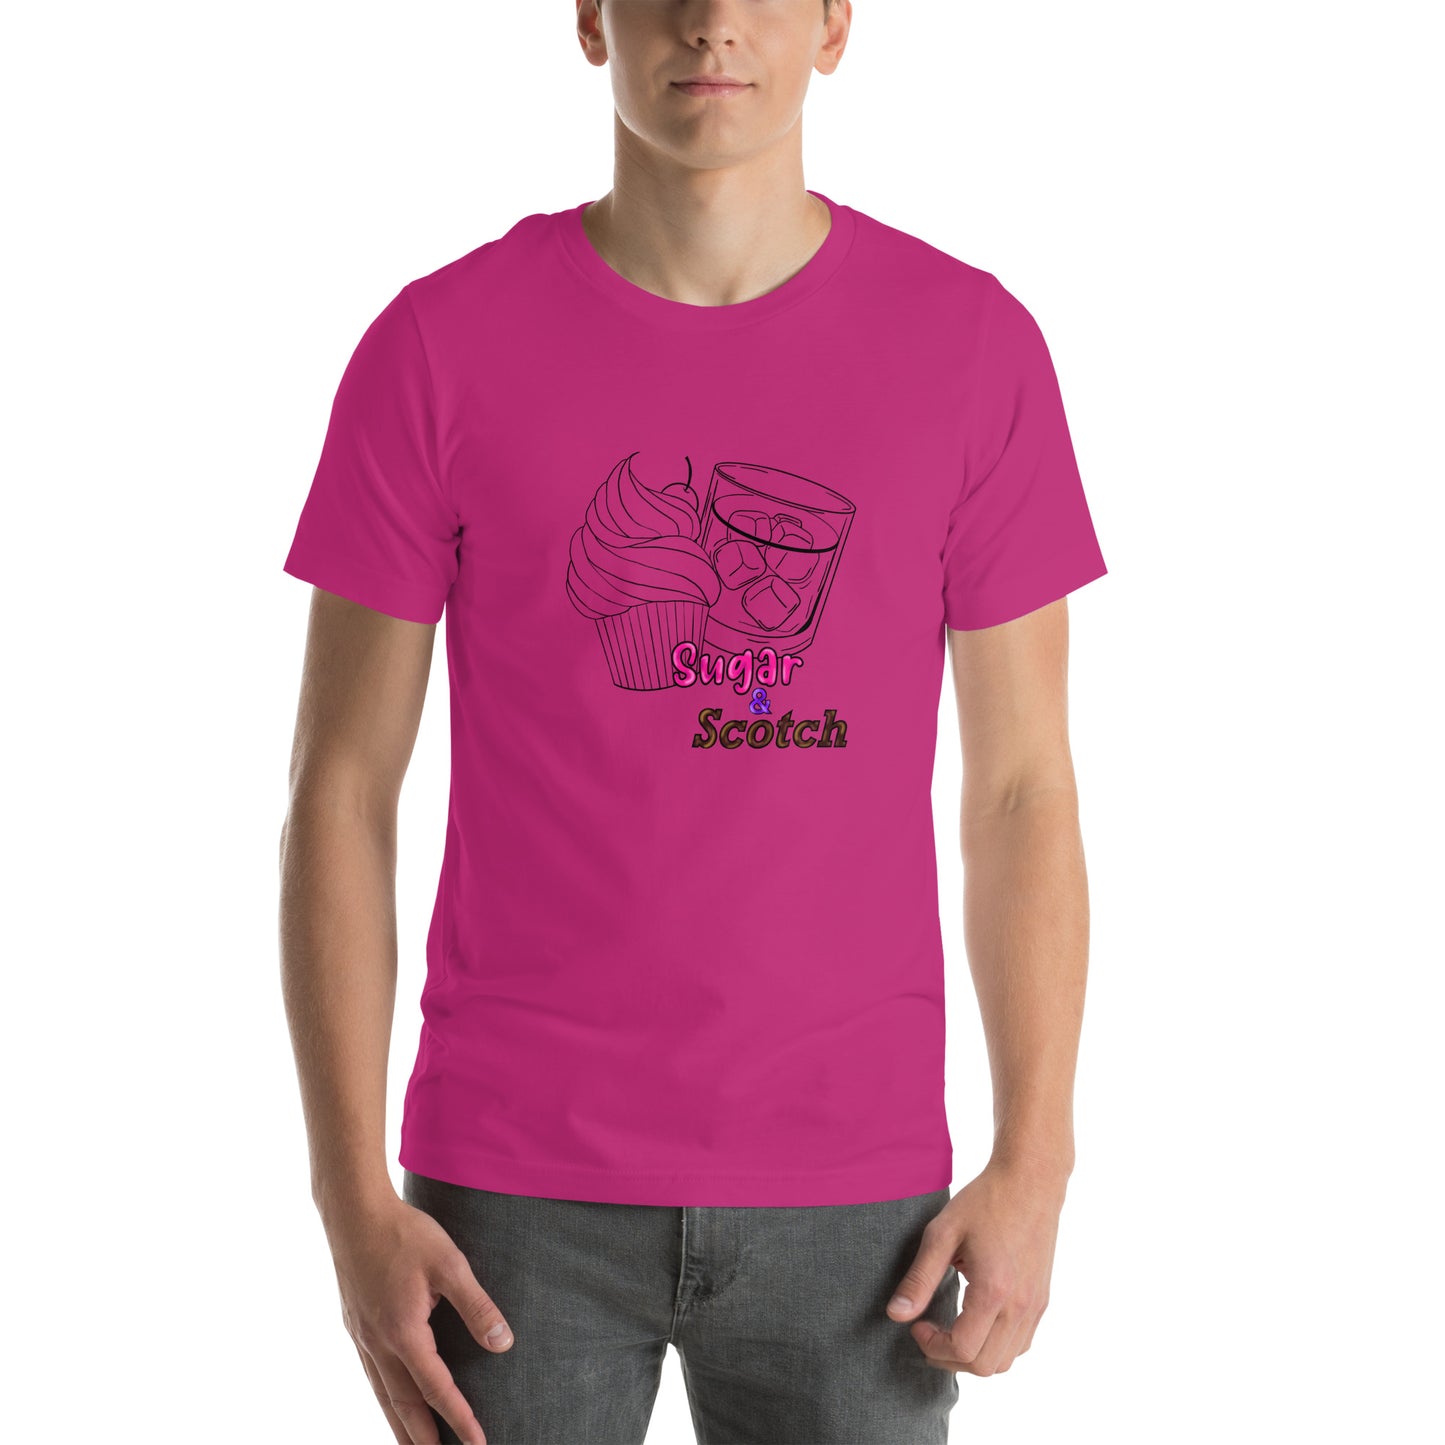 Sugar and Scotch Licensed T-Shirt